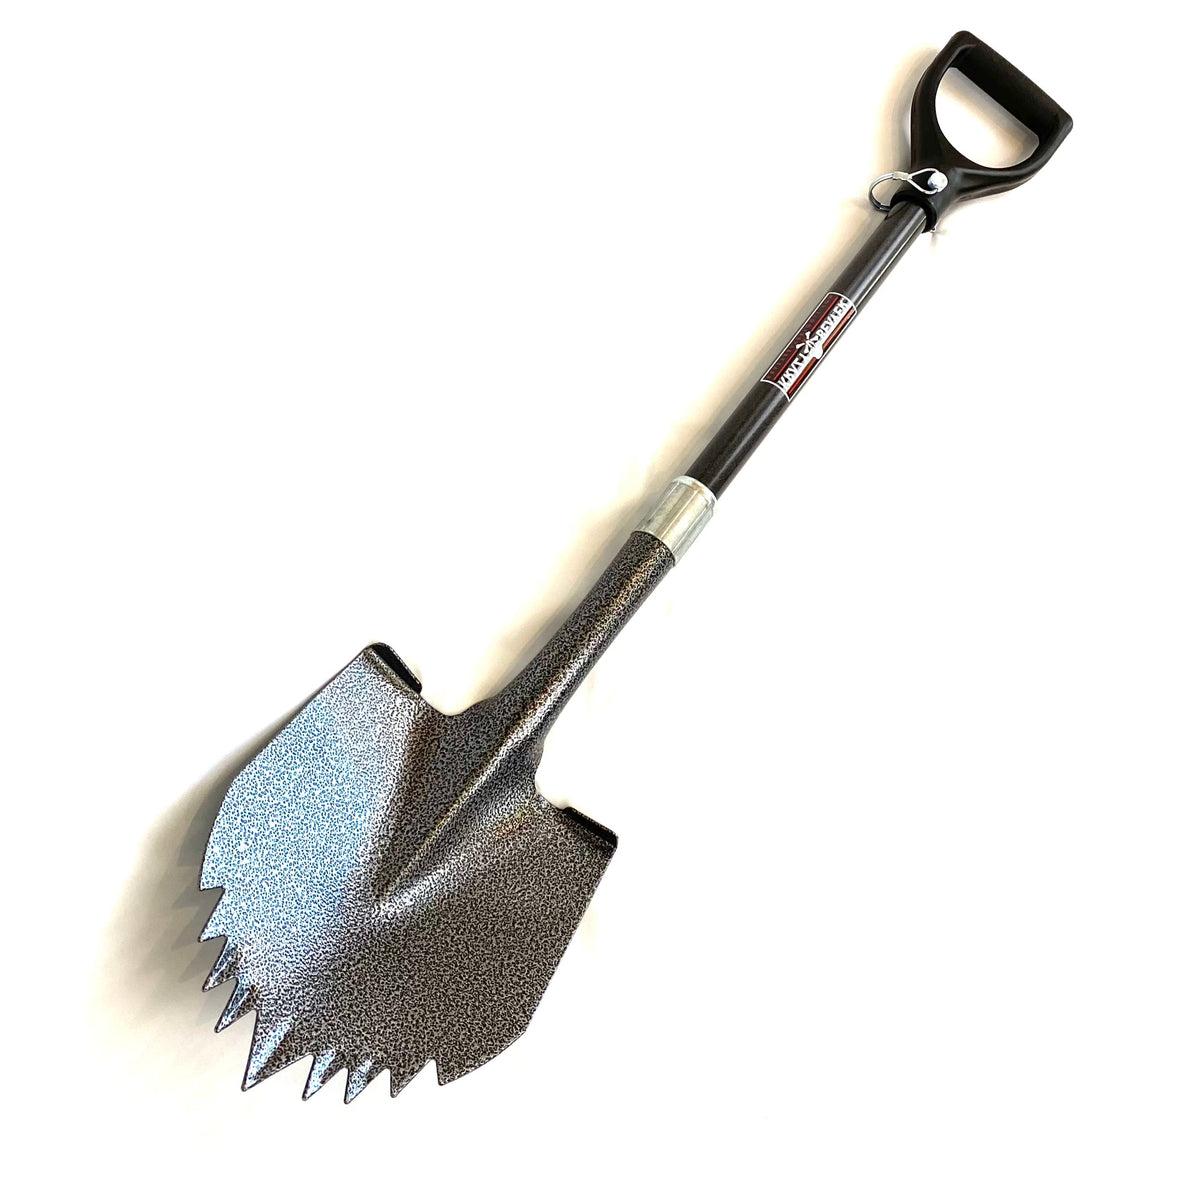 Krazy Beaver Shovel (Silver Vein Head / Black Handle 45638)  Recovery Gear, Camping gear, Shovel, Camping Krazy Beaver Tools- Overland Kitted